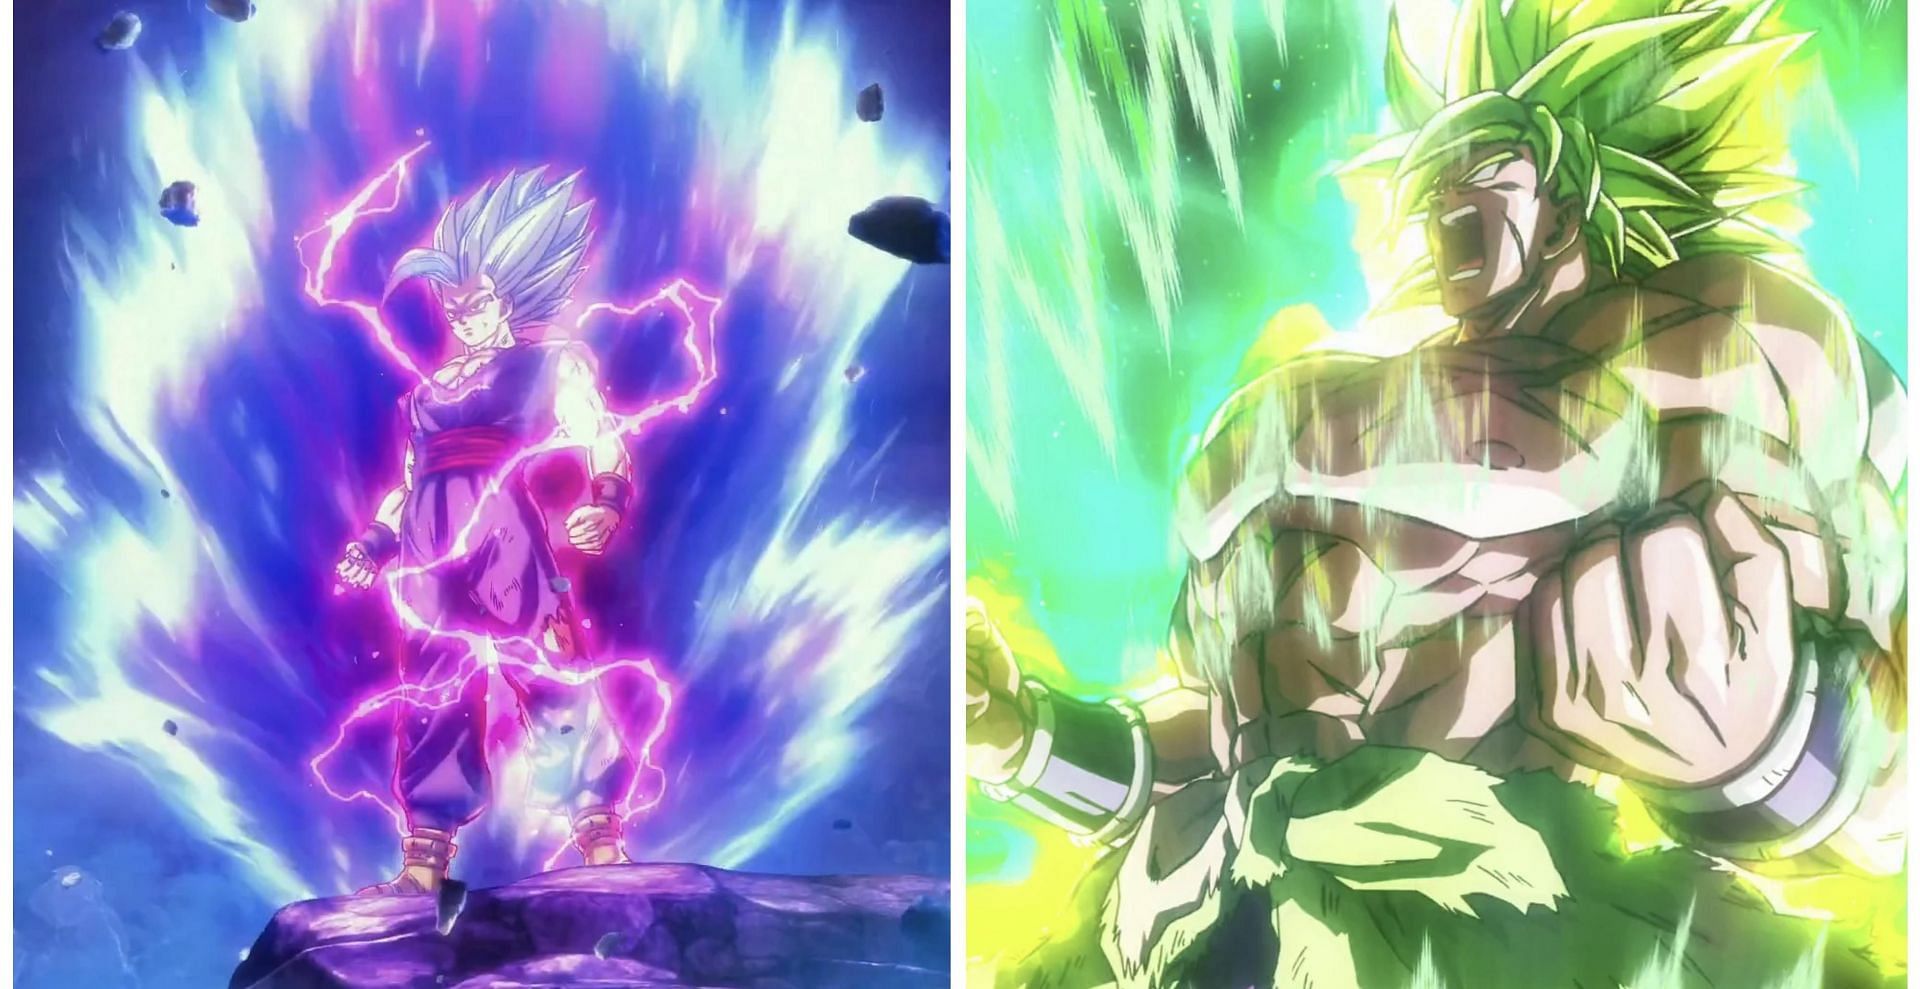 How Does Gohan's New Form Compare To Ultra Ego Vegeta?